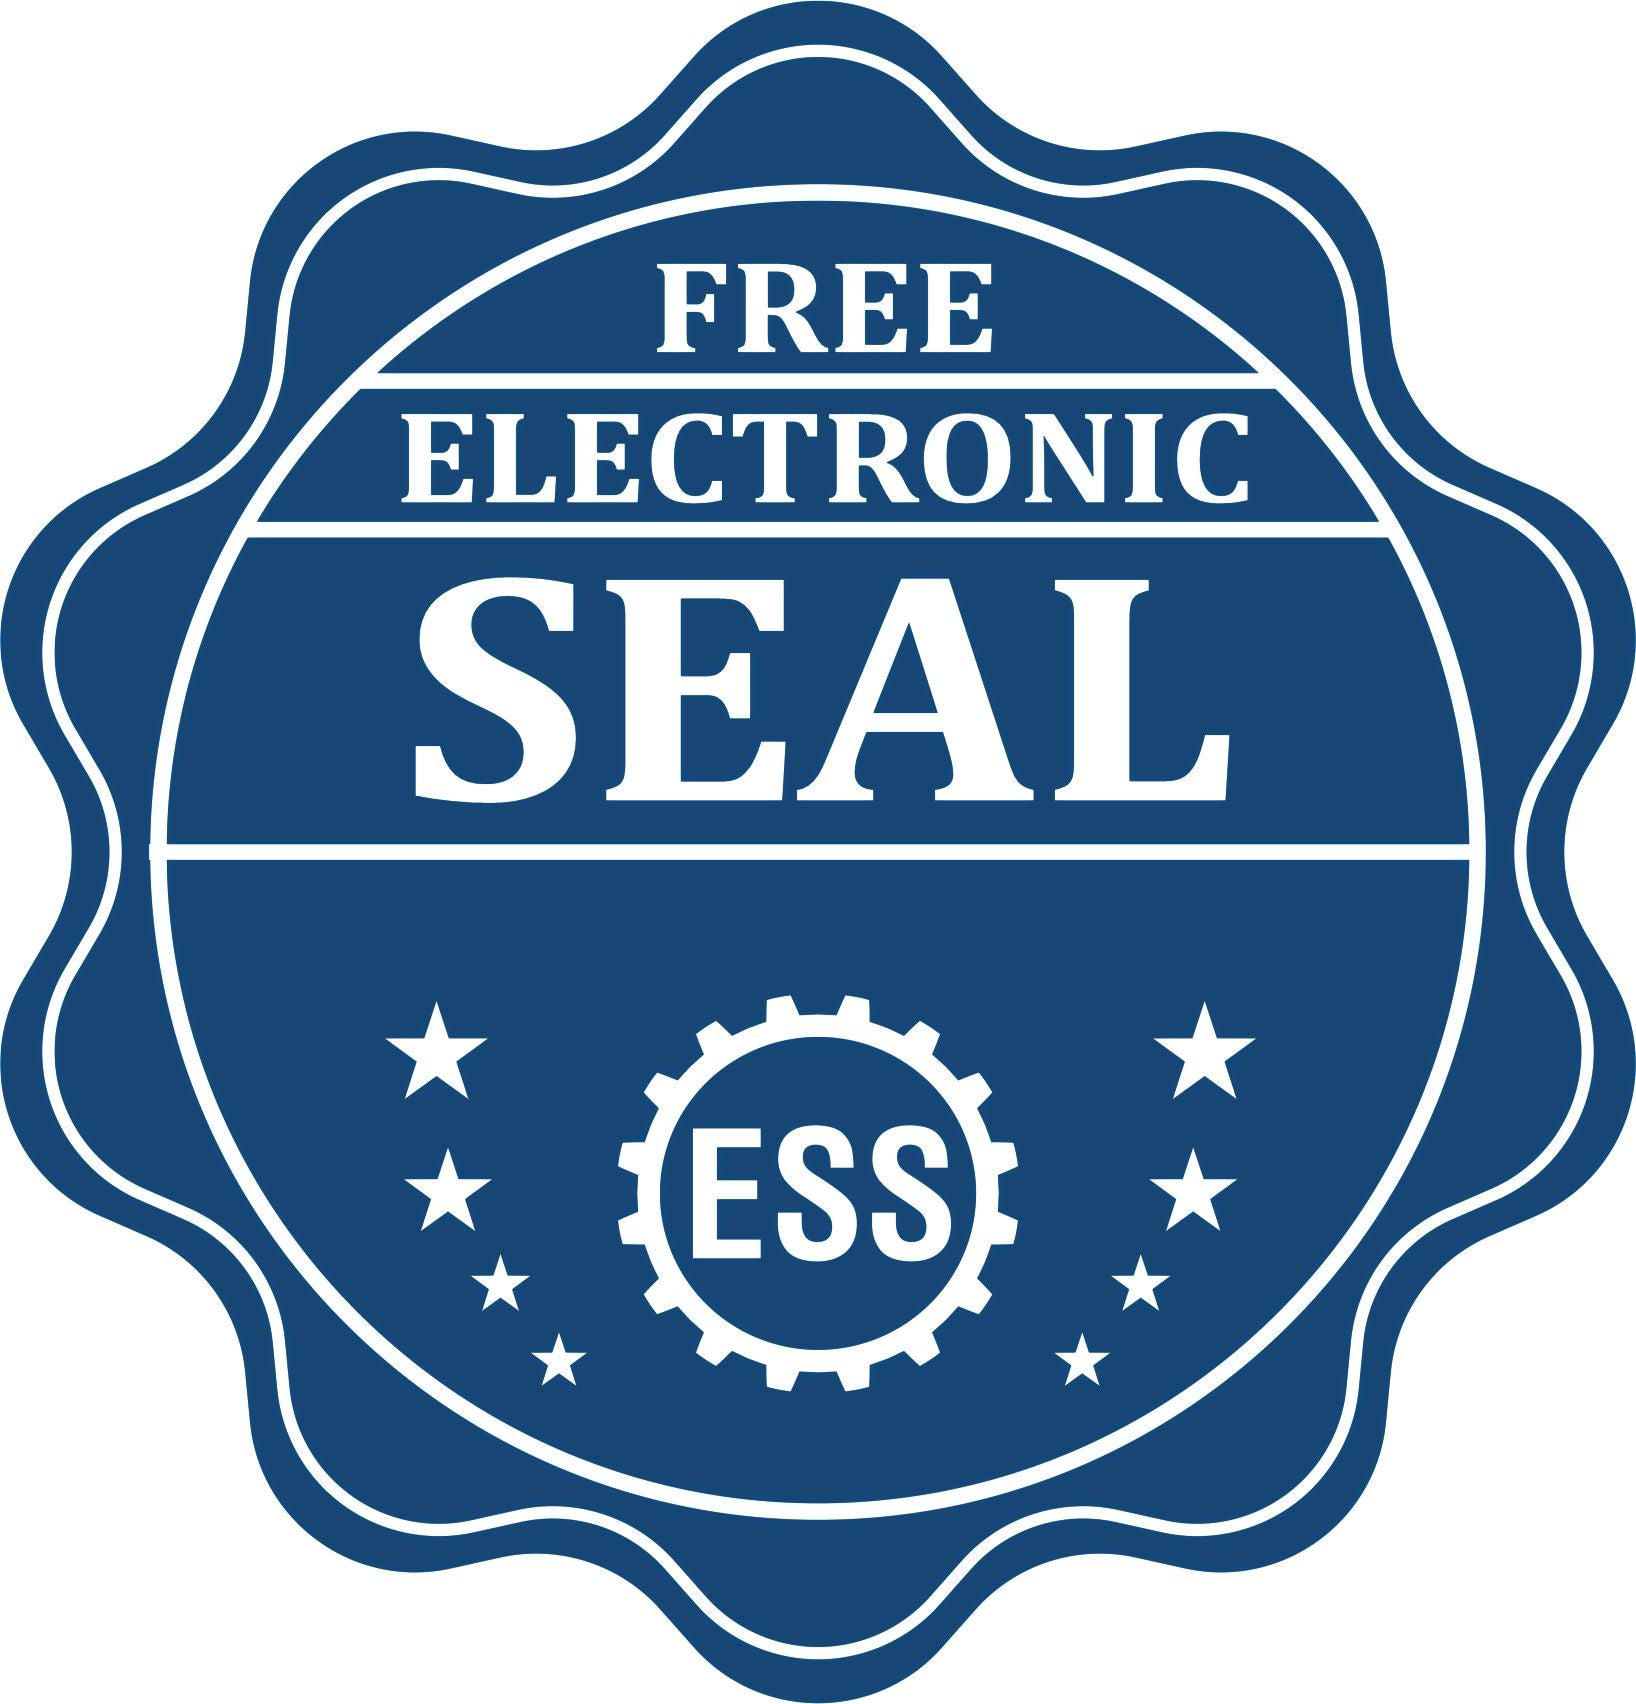 A badge showing a free electronic seal for the Hybrid Utah Architect Seal with stars and the ESS gear on the emblem.